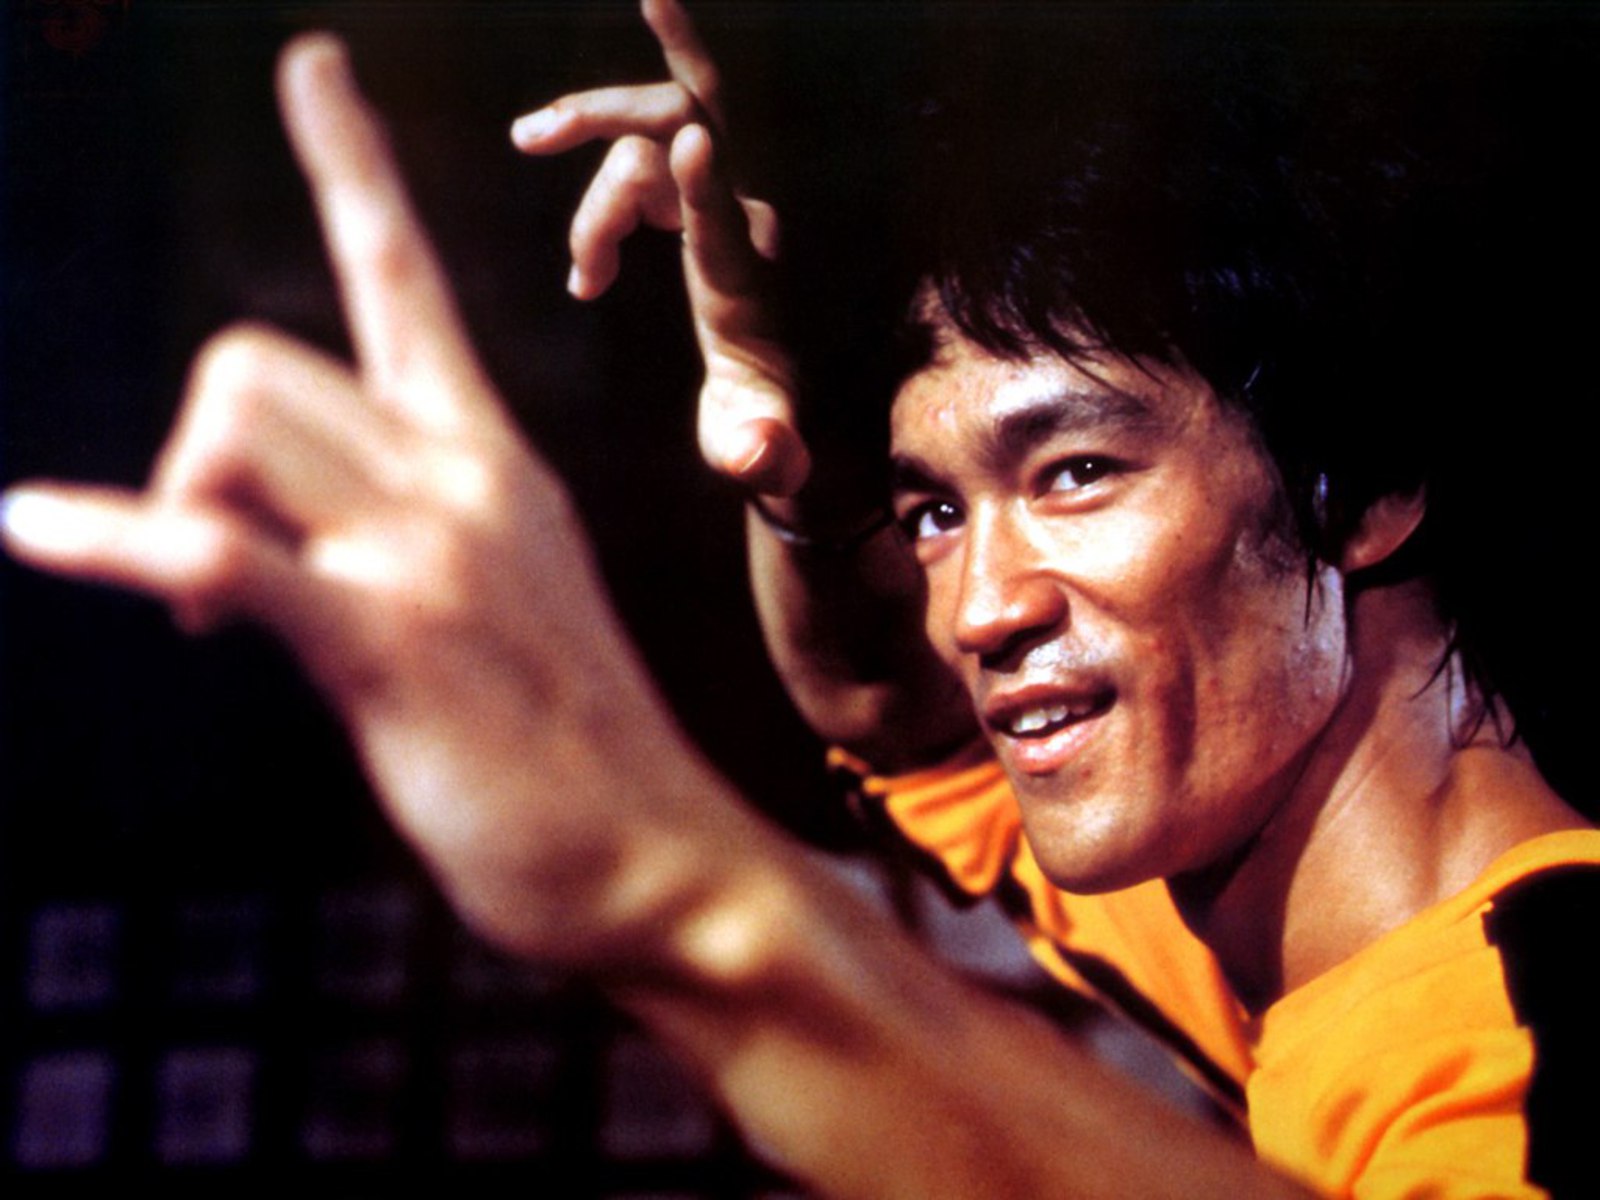 You like Bruce Lee. Ever been a victim of Bruceploitation?